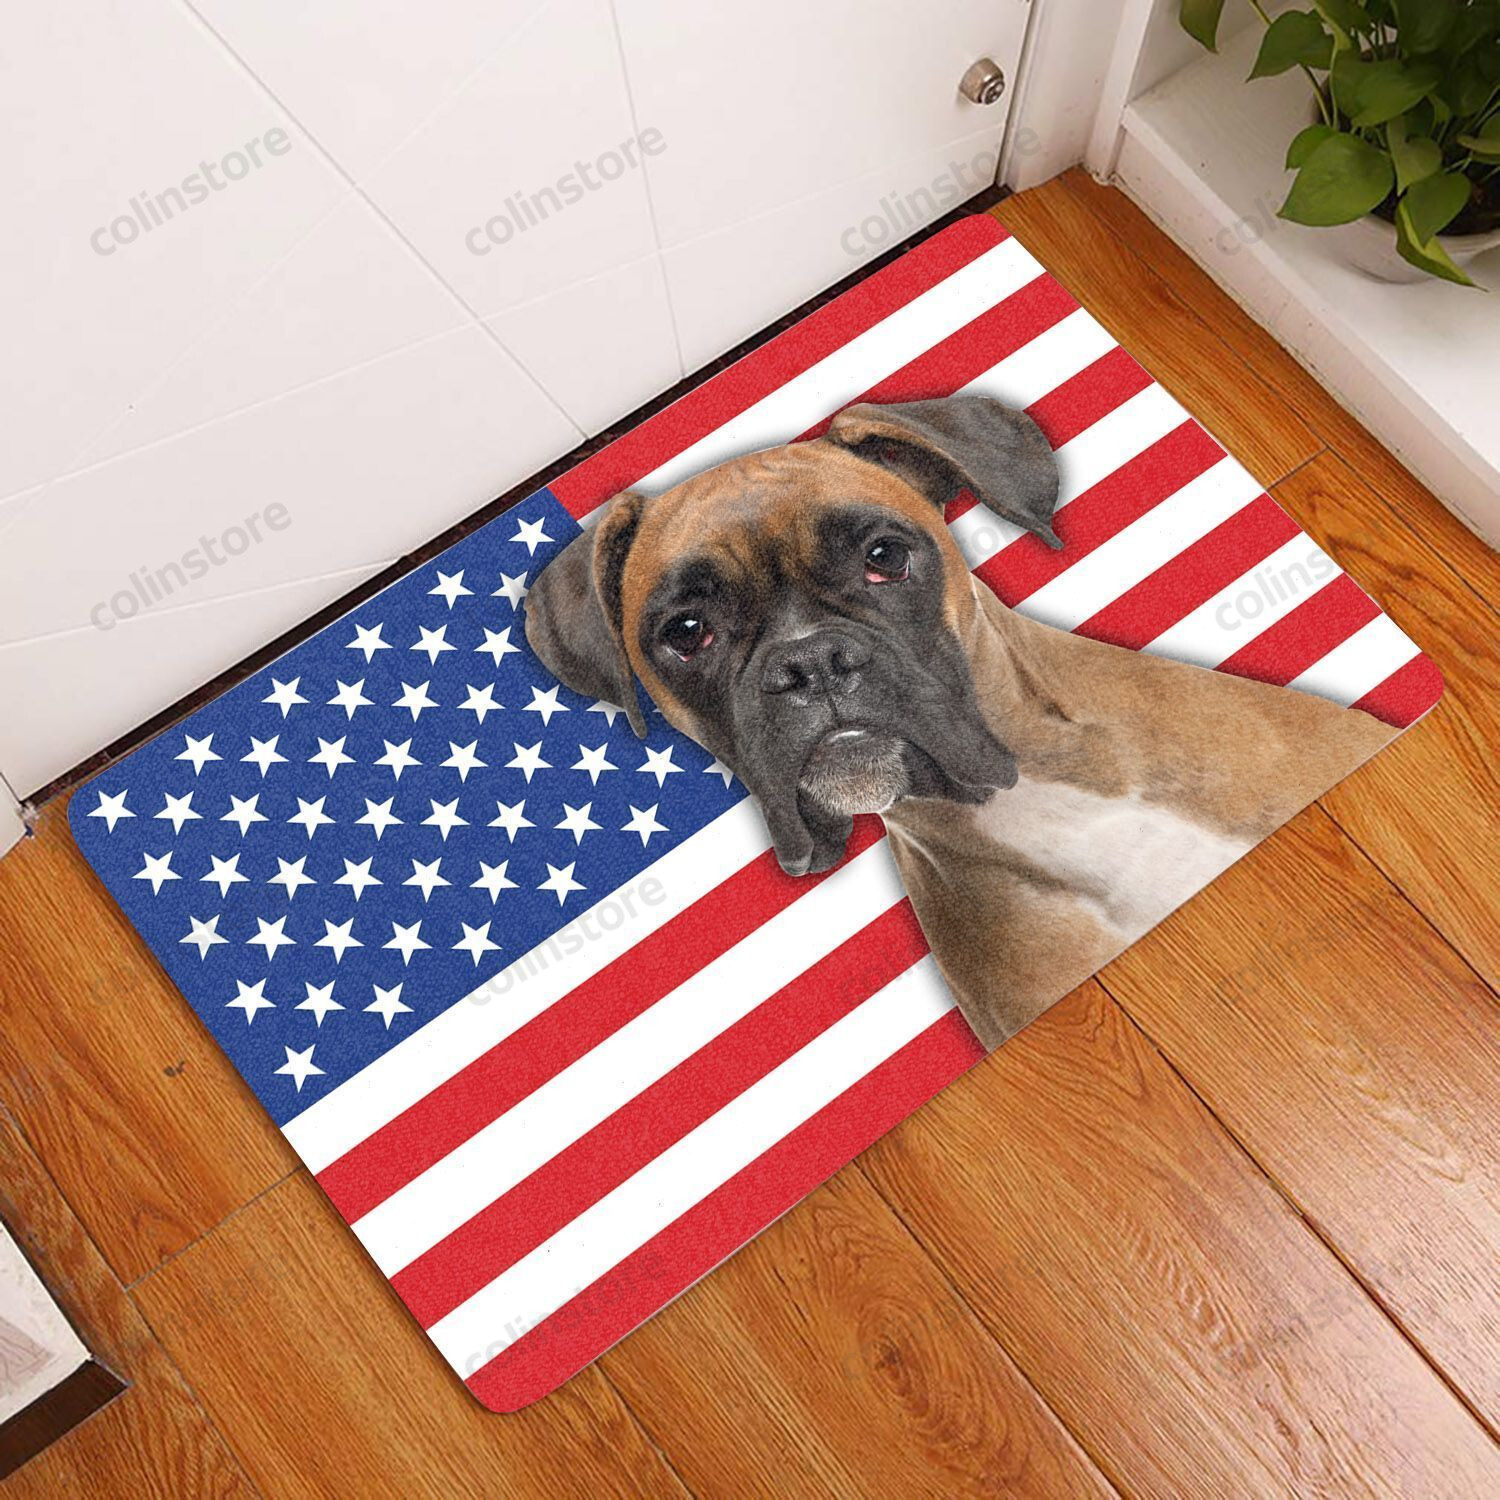 Amazing Boxer With American Flag - Dog Doormat Welcome Mat